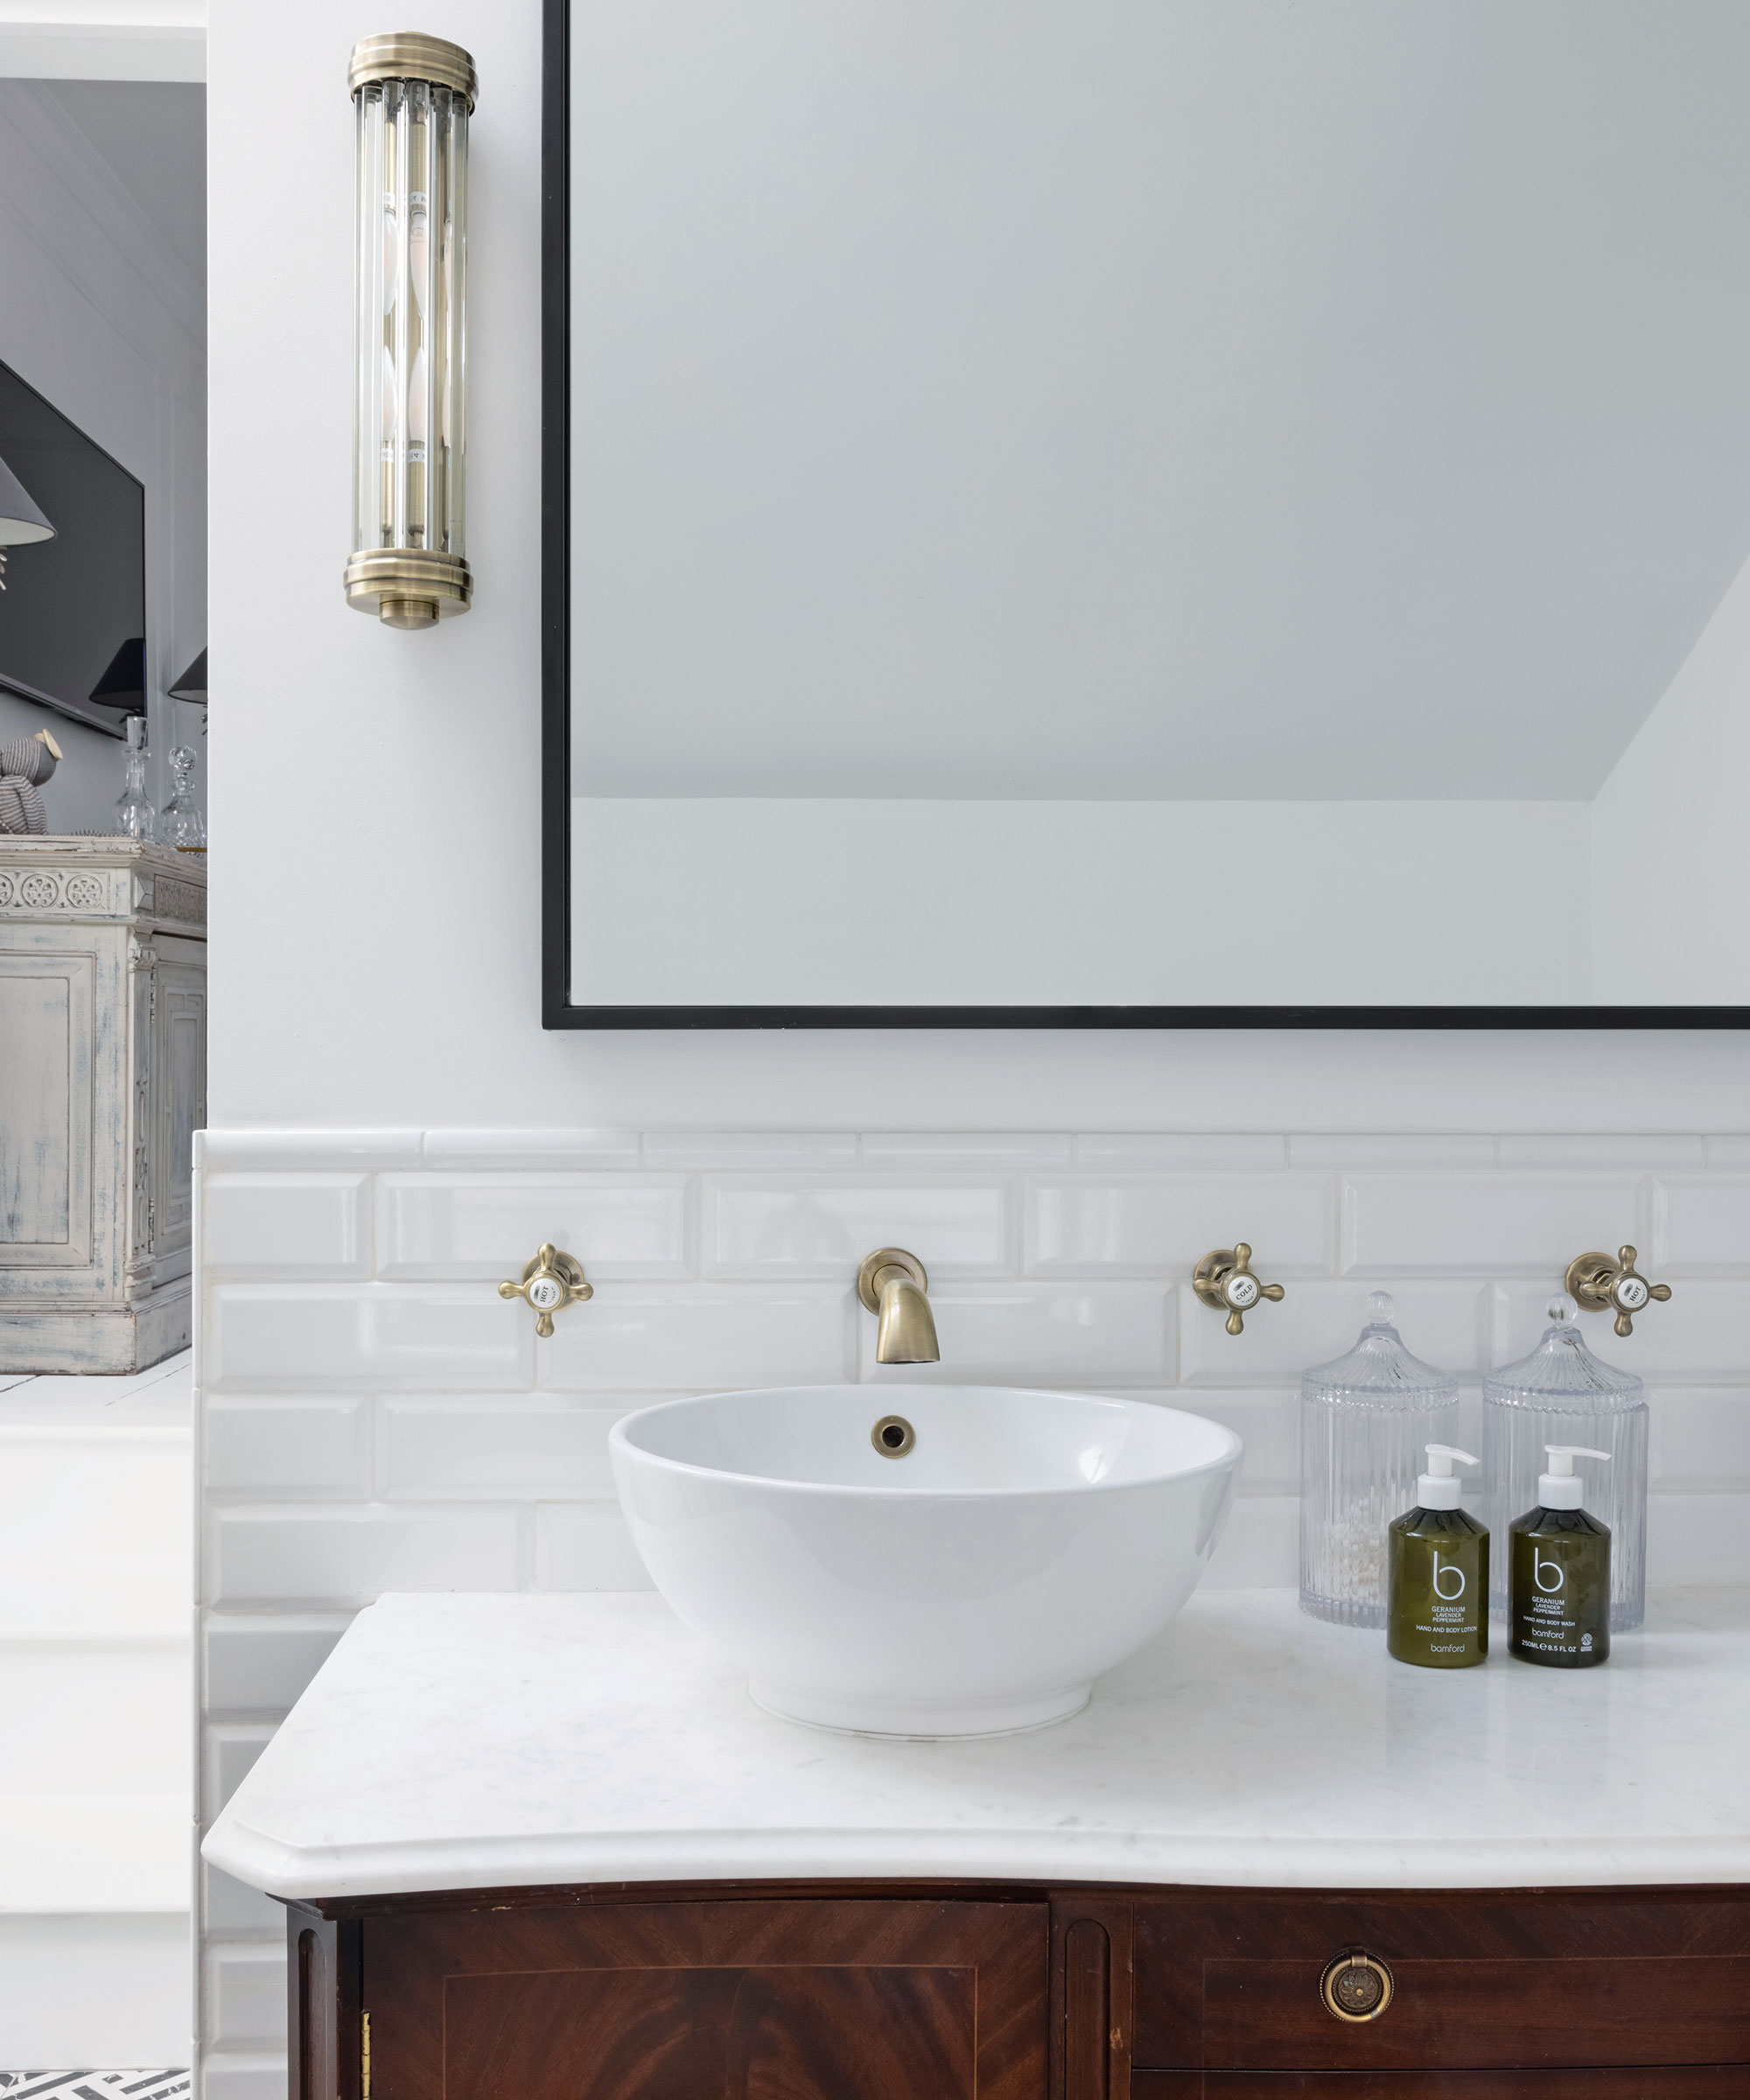 WHite vanity unit with large mirror hung on wall above